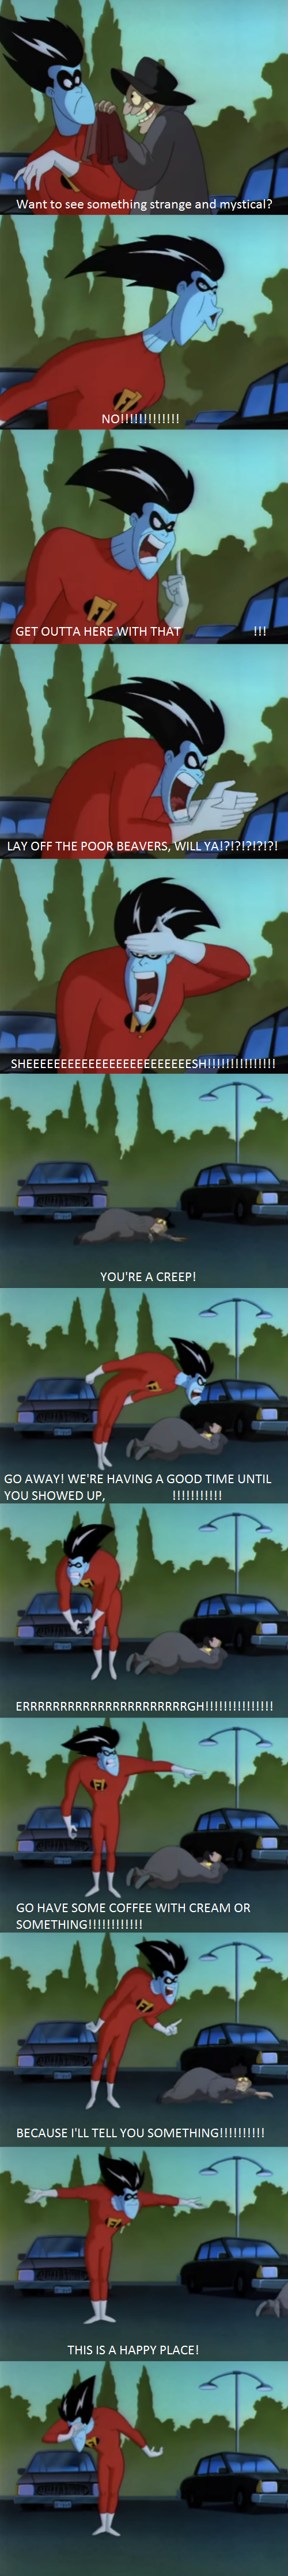 High Quality Freakazoid Knows How To Handle Creeps Blank Meme Template